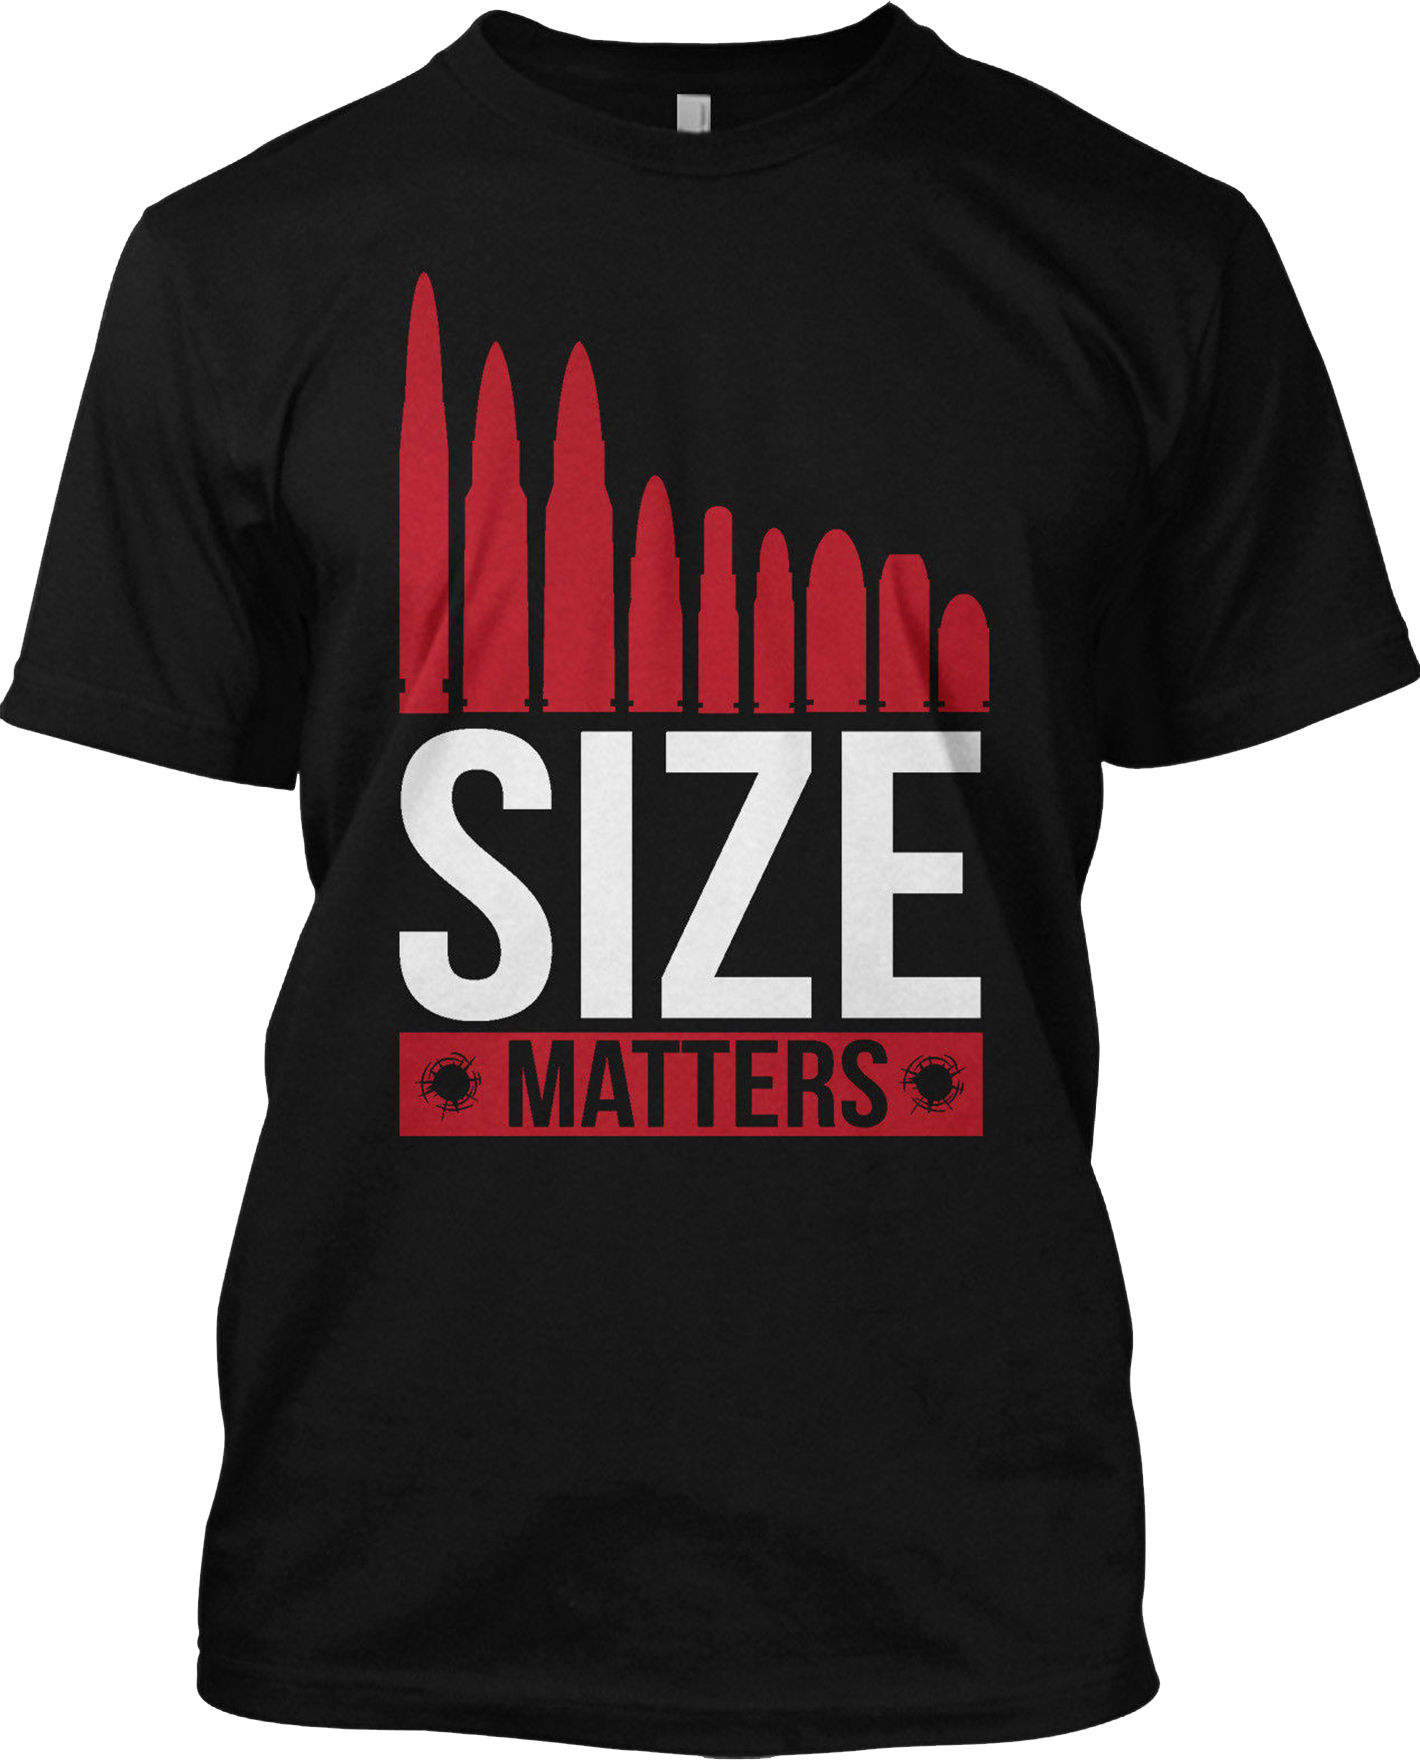 Size Matters Bullets Funny T Shirt Gun Rights Graphic Hunting Gift Tee